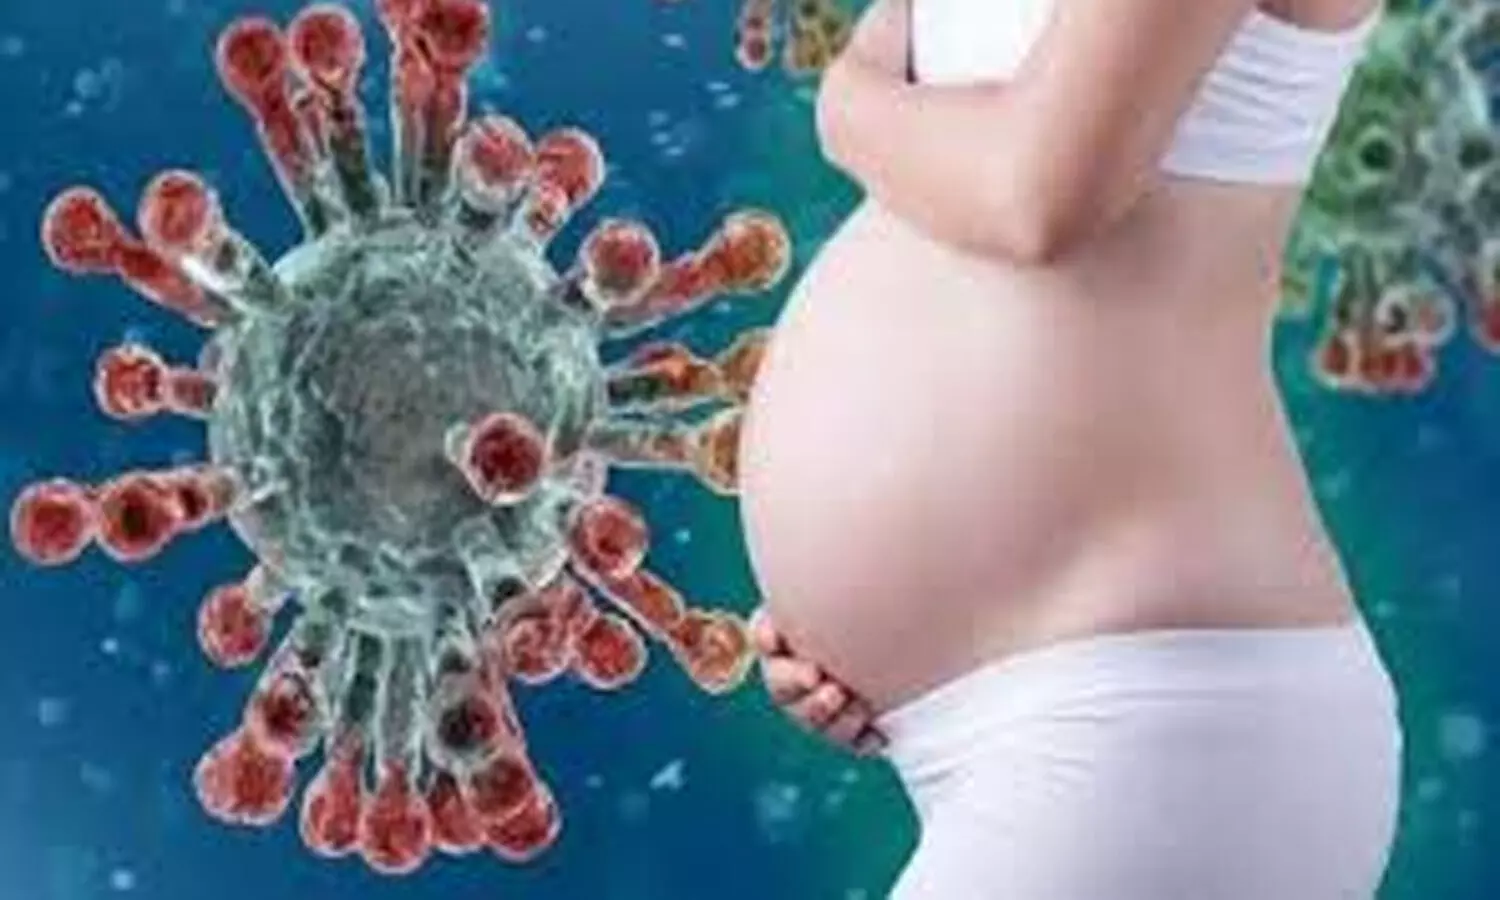 Pregnant women infected with COVID-19 show placental injury